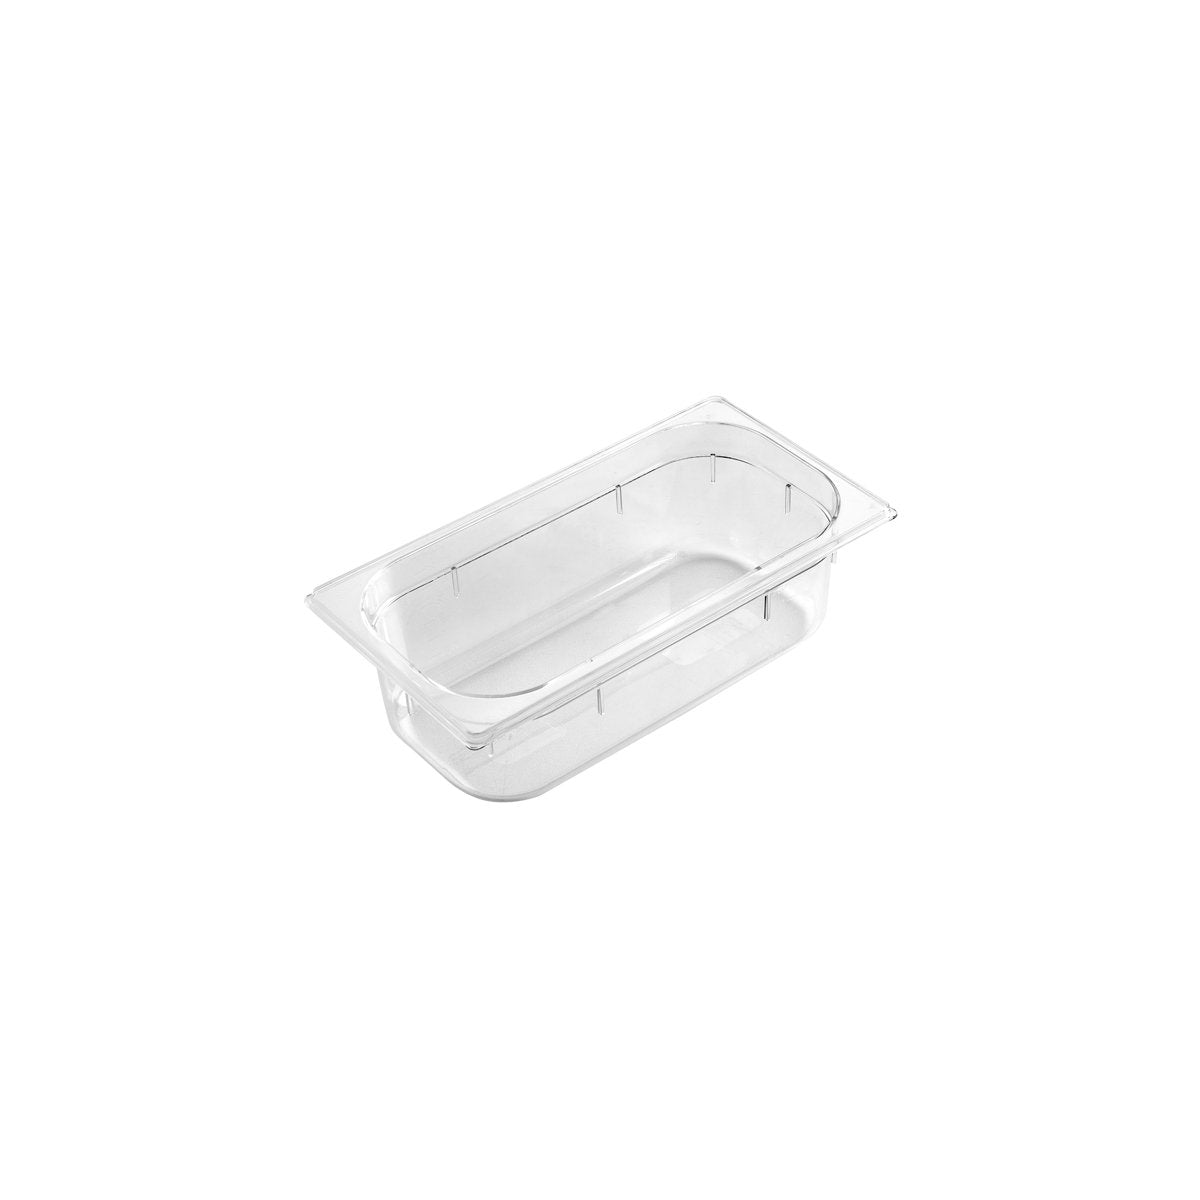 PC-13150CL Inox Macel Gastronorm Pan Polycarbonate Clear 1/3 Size 150mm Tomkin Australia Hospitality Supplies